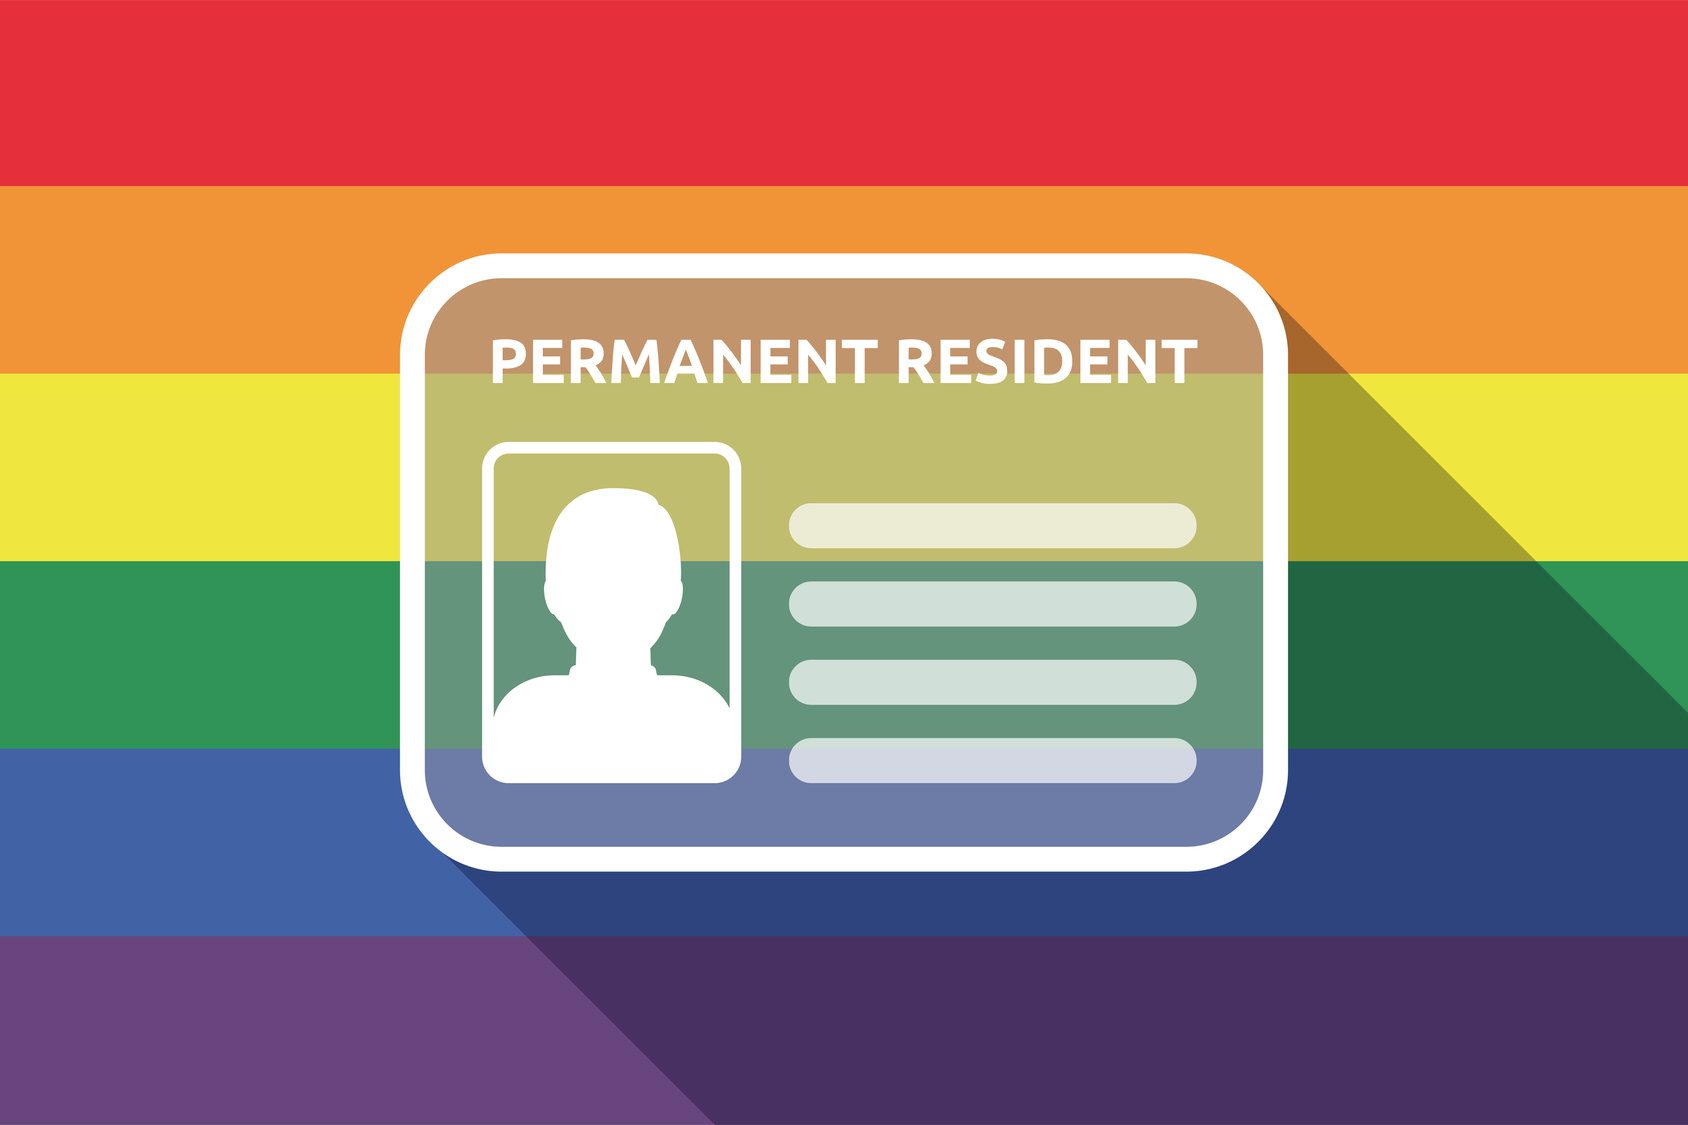 6 Lesser-Known Benefits of LGBT Immigration